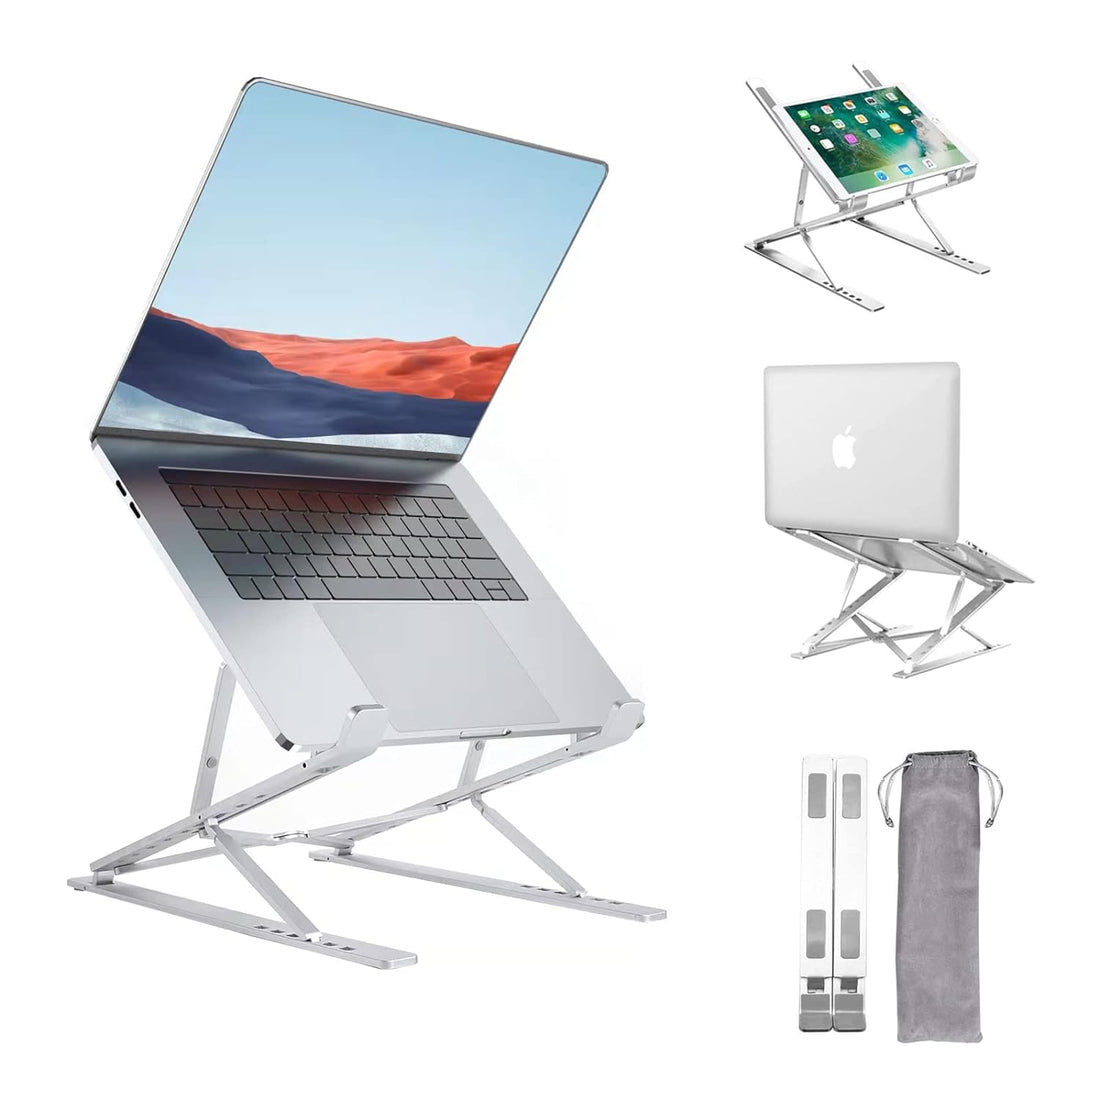 Laptop Stand for Desk，Stable MacBook Pro Stand，Ergonomic Aluminum Computer Riser for 12 13 15 16 17 inch ，Computer Cooling Stand for Mac MacBook Pro Air,HP, Dell, More PC Notebook (Light Silver)